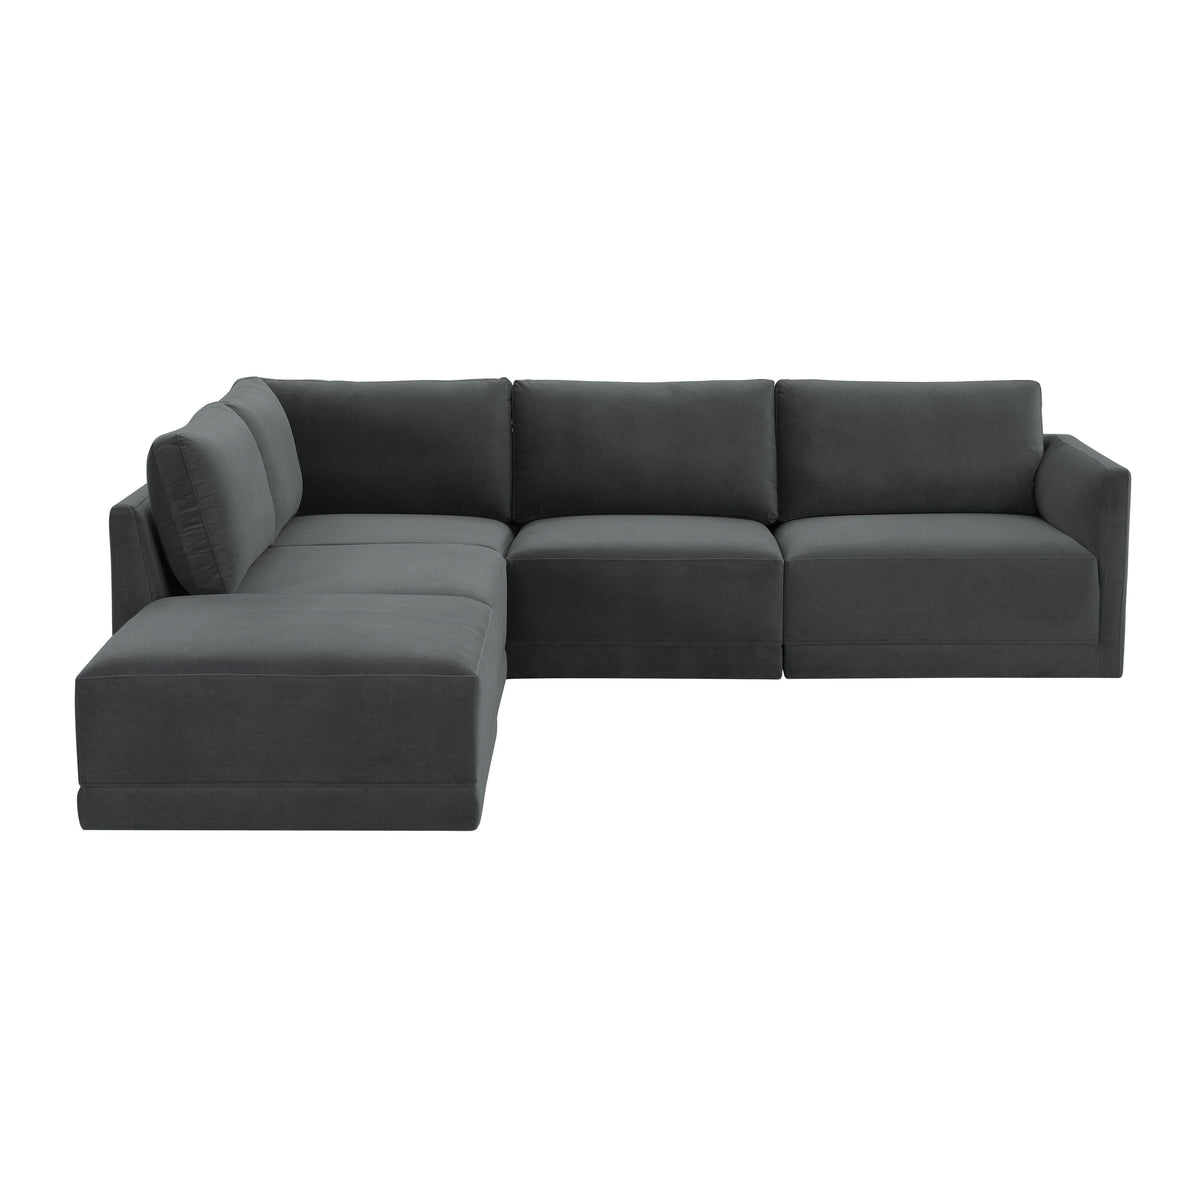 Valentina Charcoal Velvet Modular LAF Sectional Sofa - Luxury Living Collection